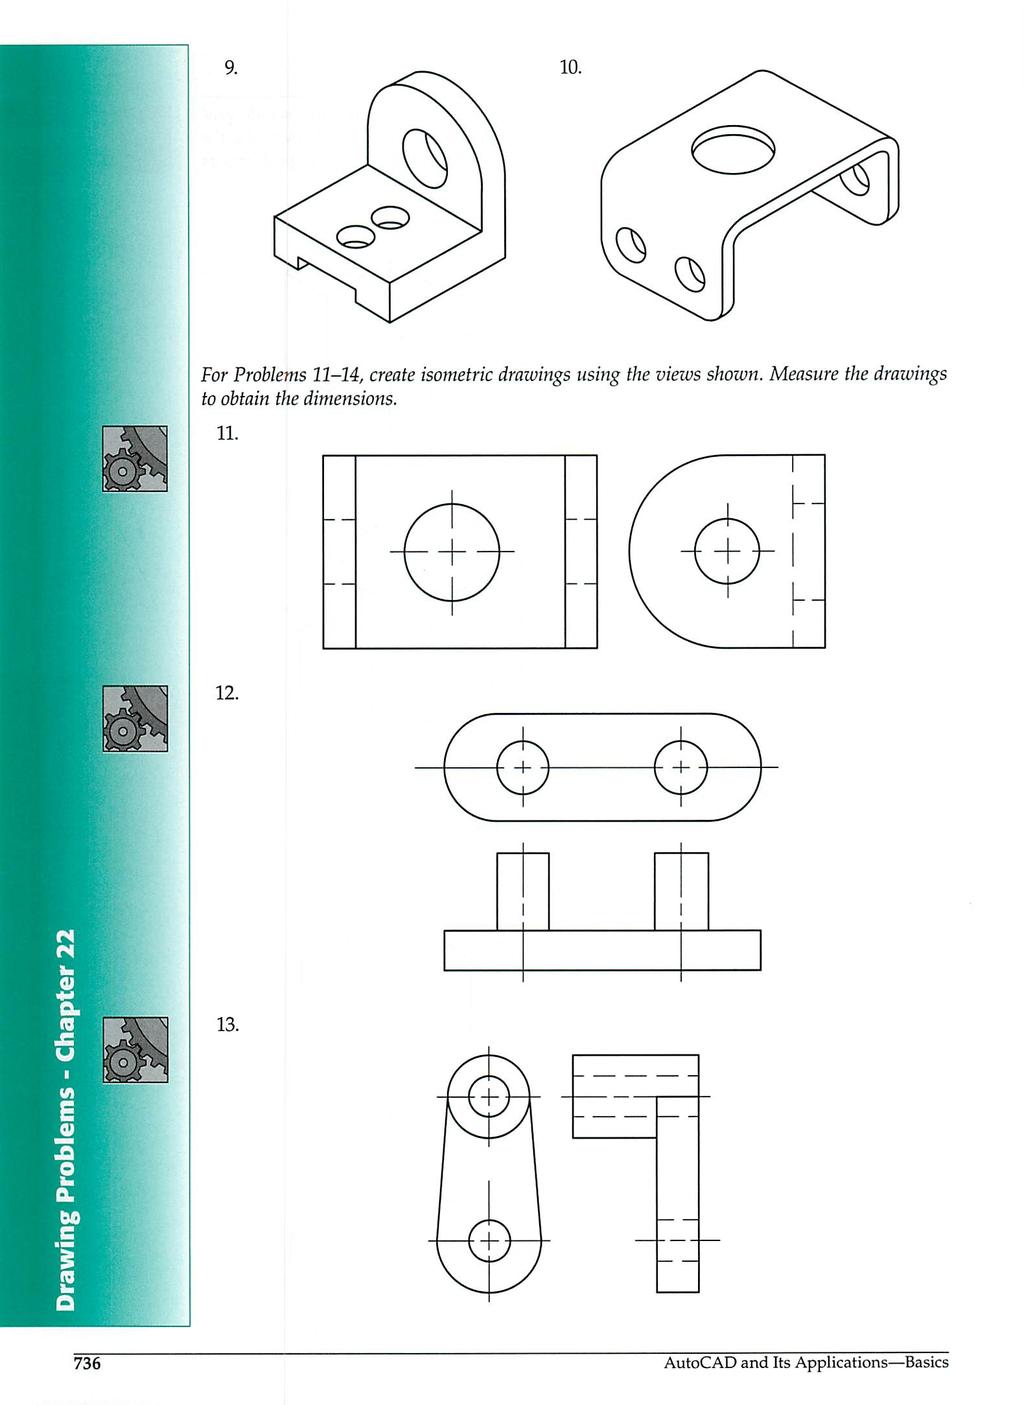 9. 10. For Problems 11-14, create isometric drawings using the views shown.